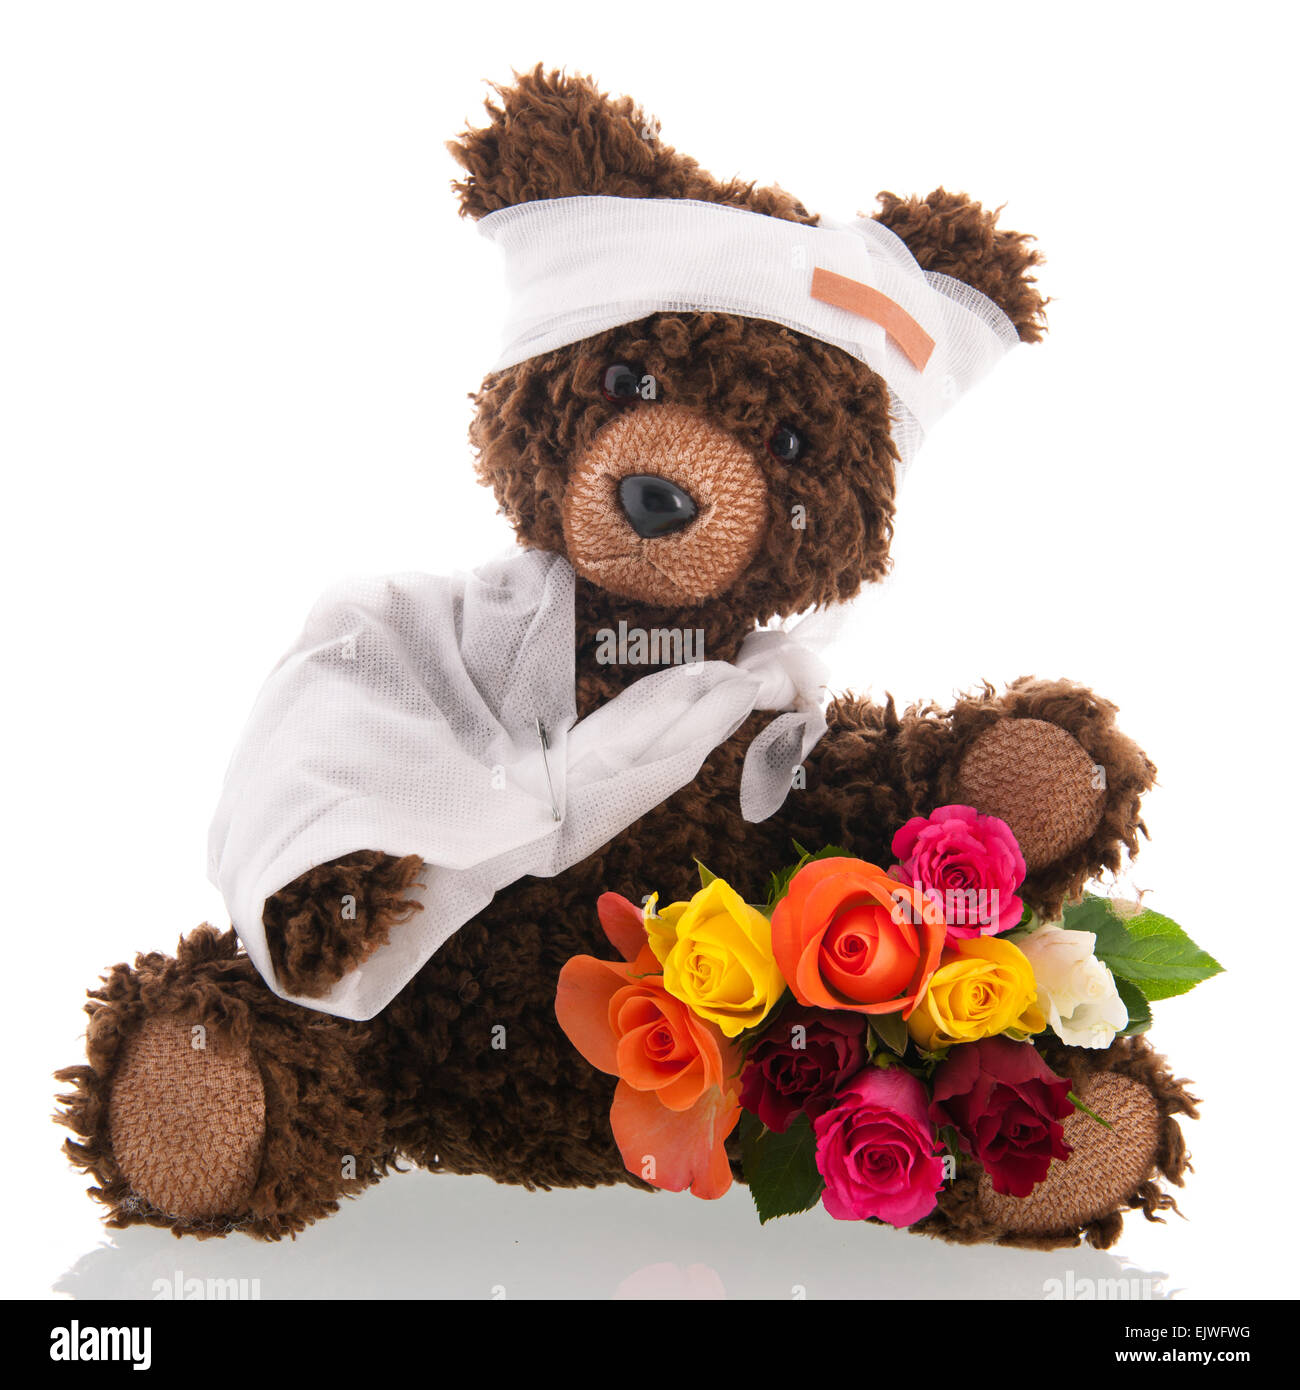 Stuffed hand made poorly bear with plaster and flowers for 'Get well soon' isolated over white background Stock Photo